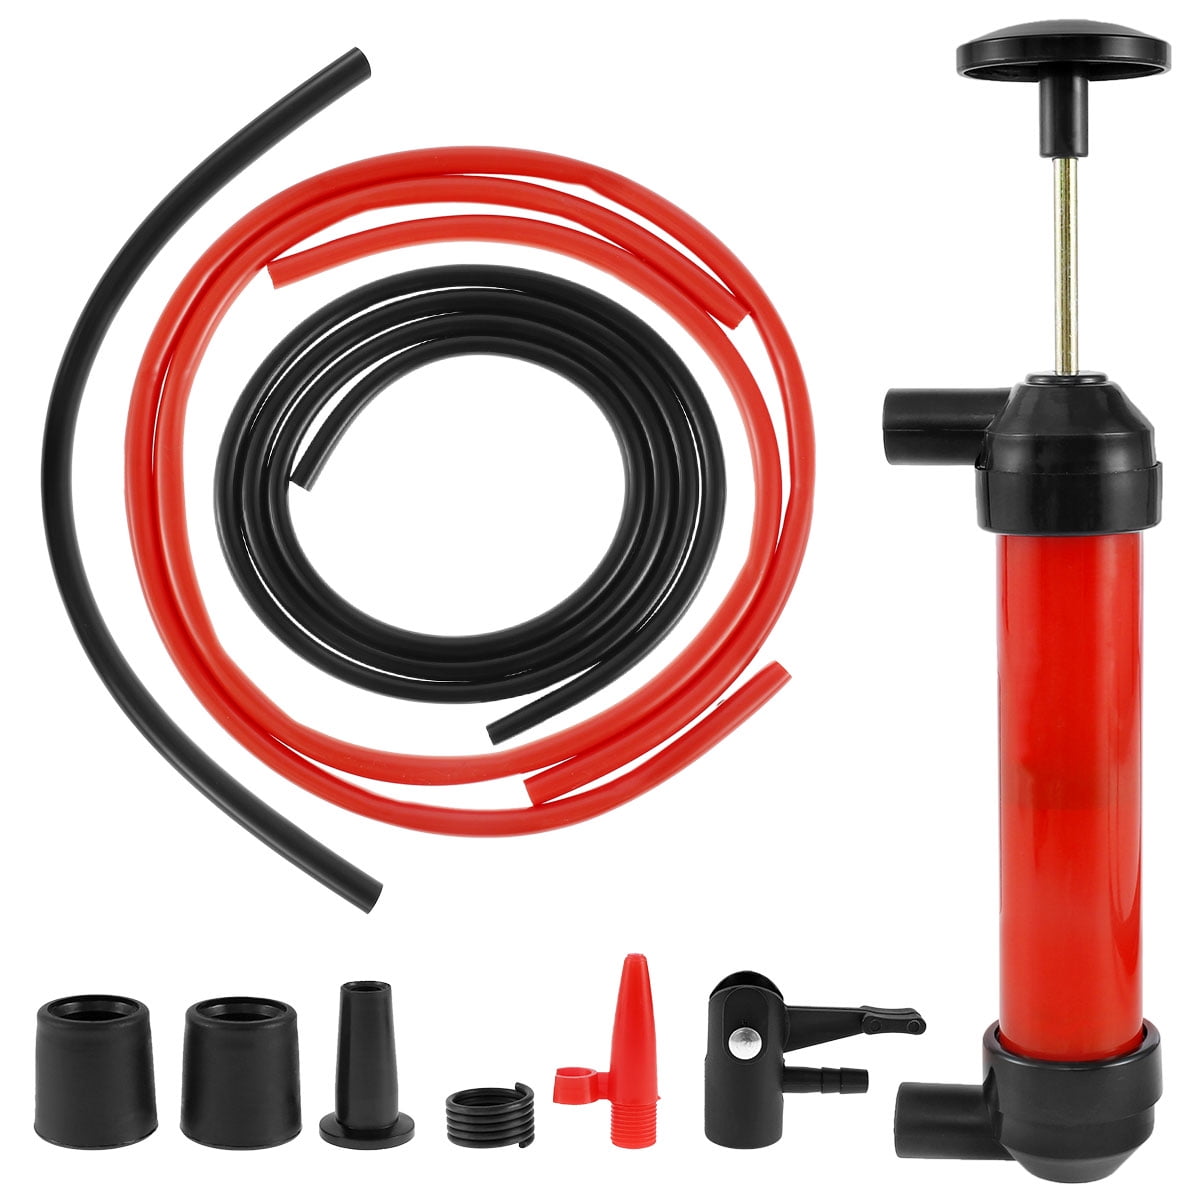 HAND SIPHON PUMP FUEL OIL DIESEL PETROL WATER EXTRACTOR SYPHON TRANSFER 